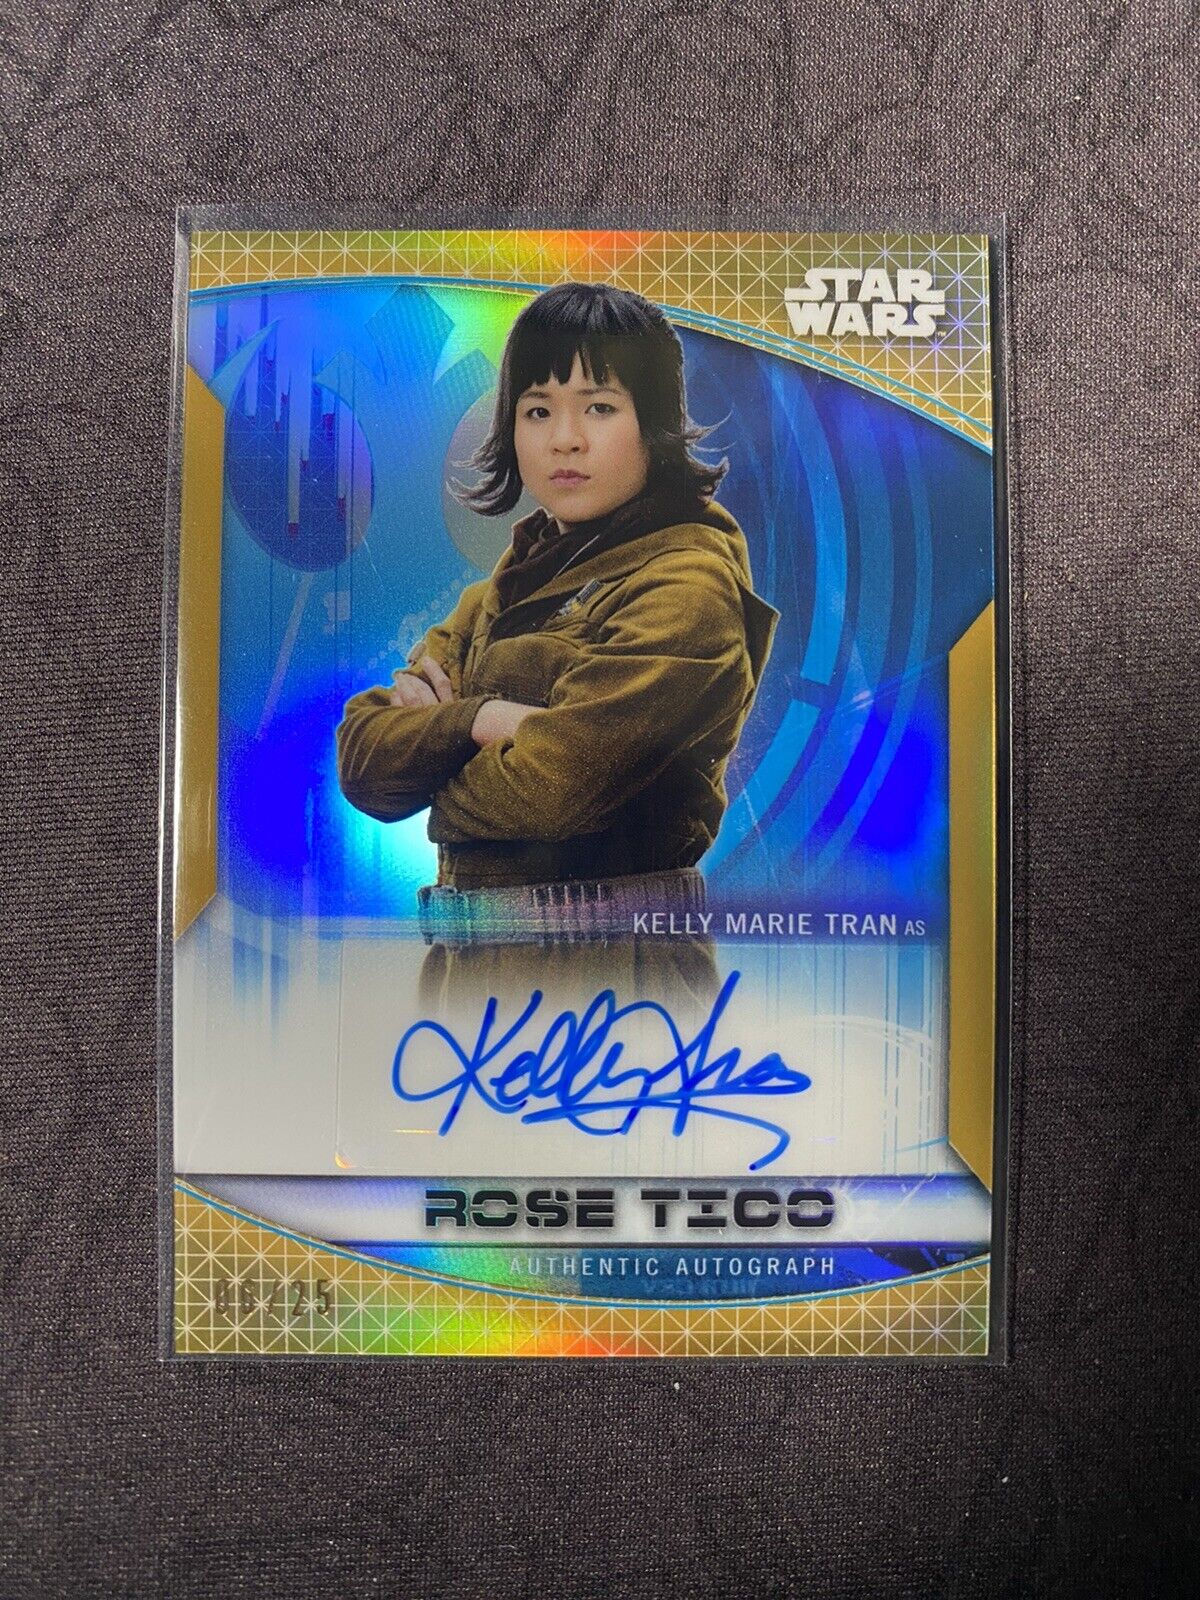 2020 Topps Star Wars Chrome Perspectives  Kelly Marie Tran Rose Tico # /25 Auto